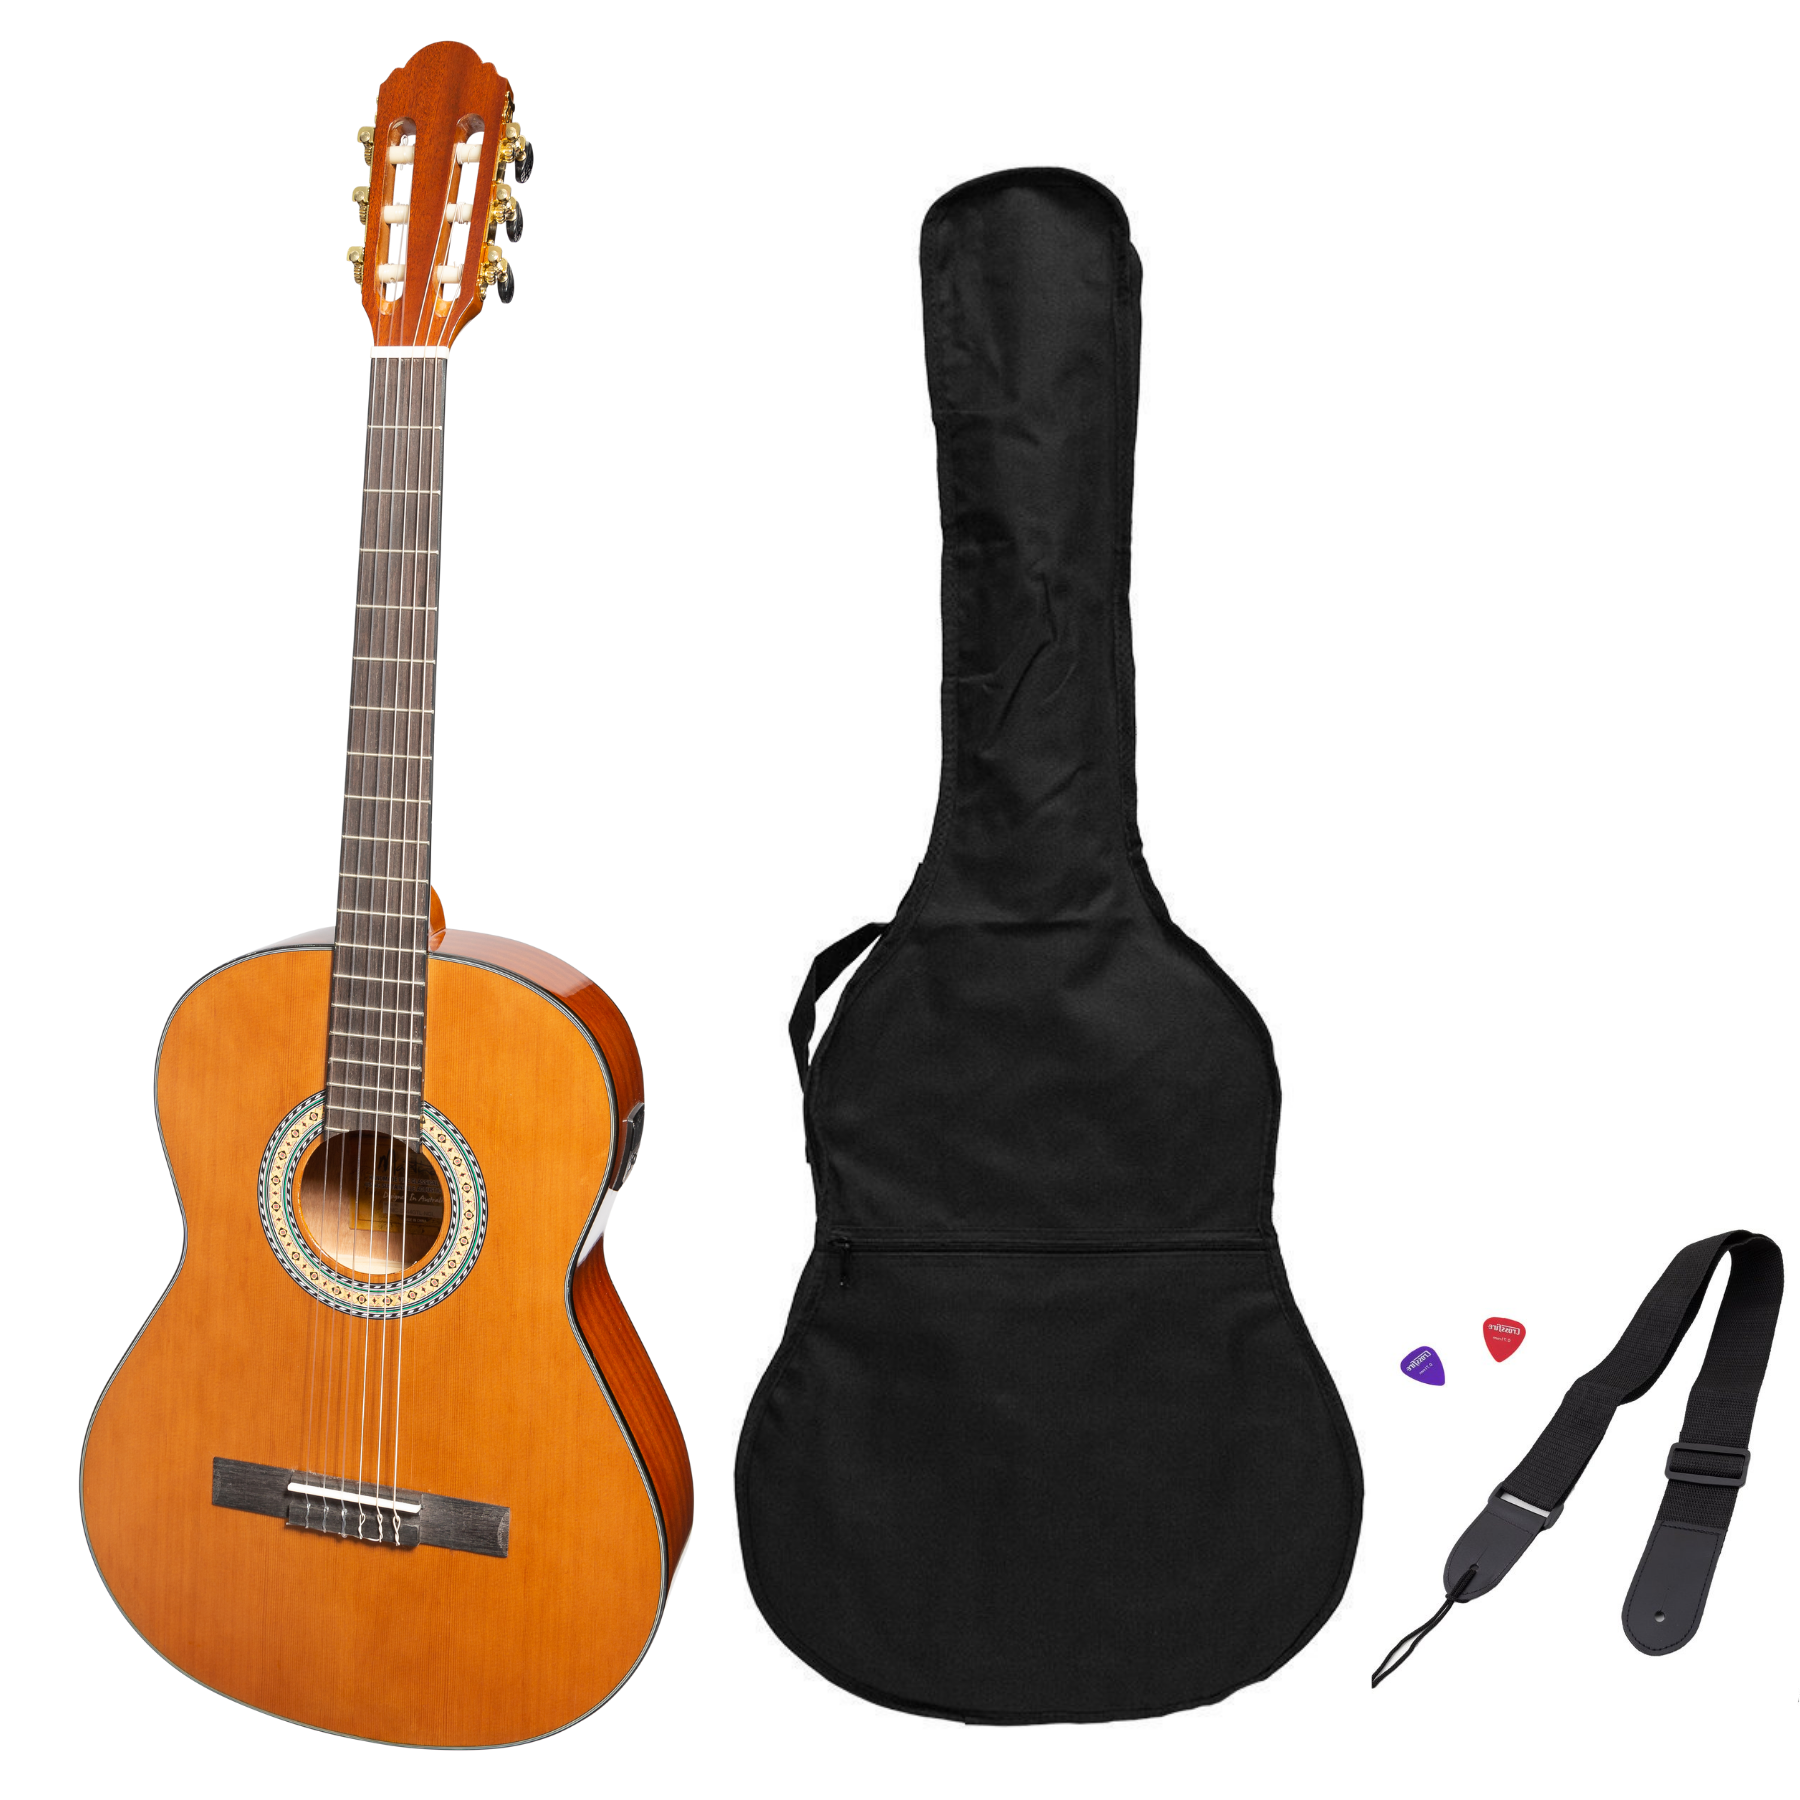 Martinez 'Slim Jim' G-Series Left Handed Full Size Student Classical Guitar Pack with Built In Tuner (Natural-Gloss)-MP-SJ44GTL-NGL